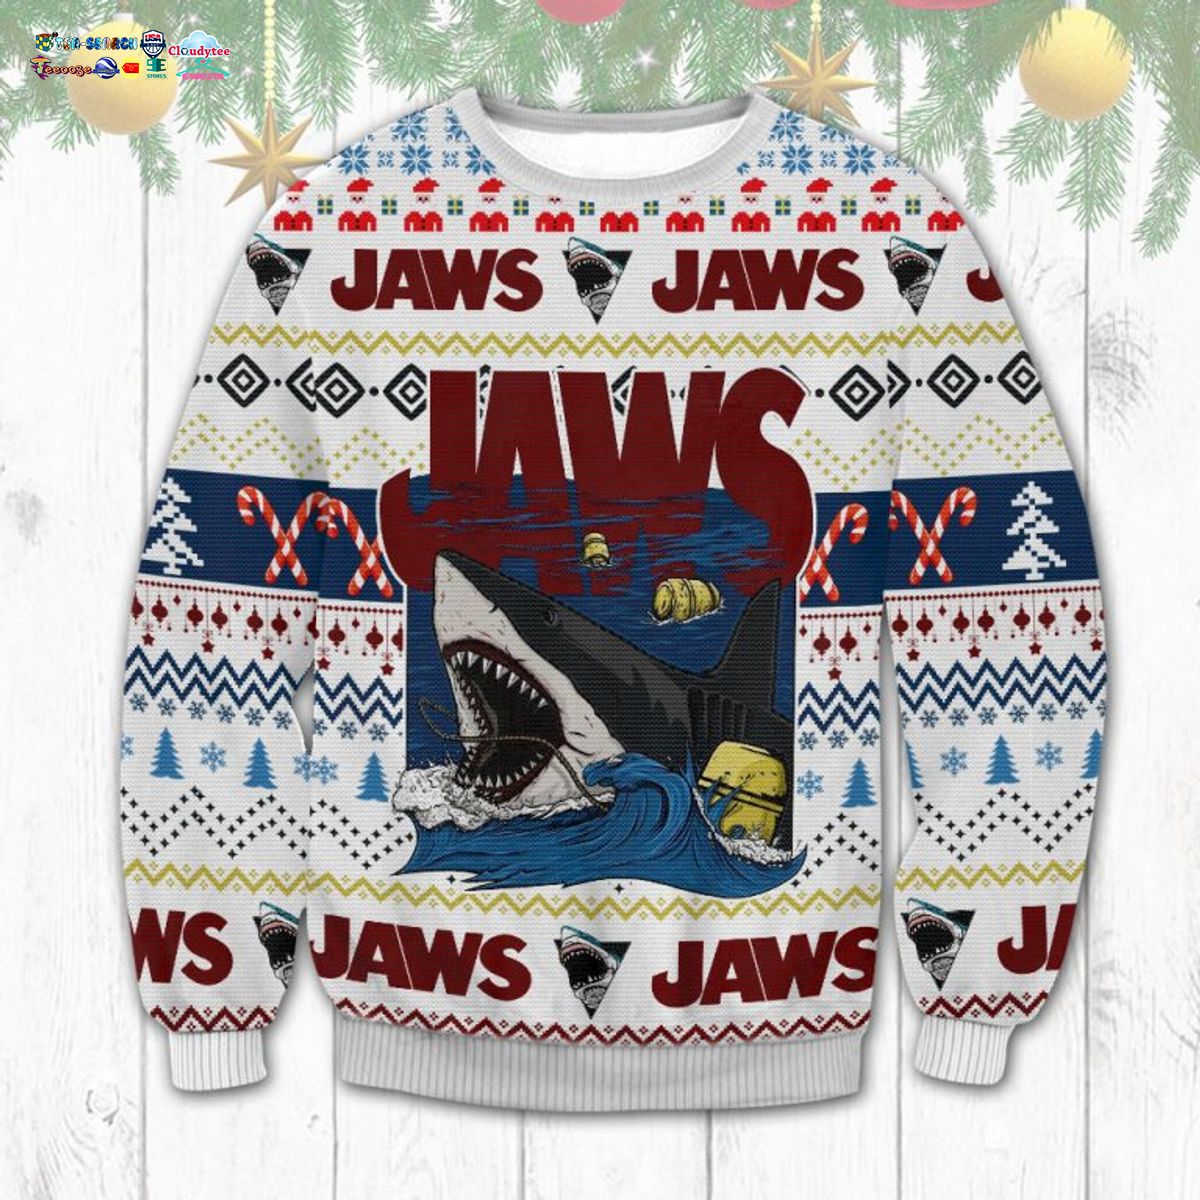 Jaws Ugly Christmas Sweater - You look fresh in nature